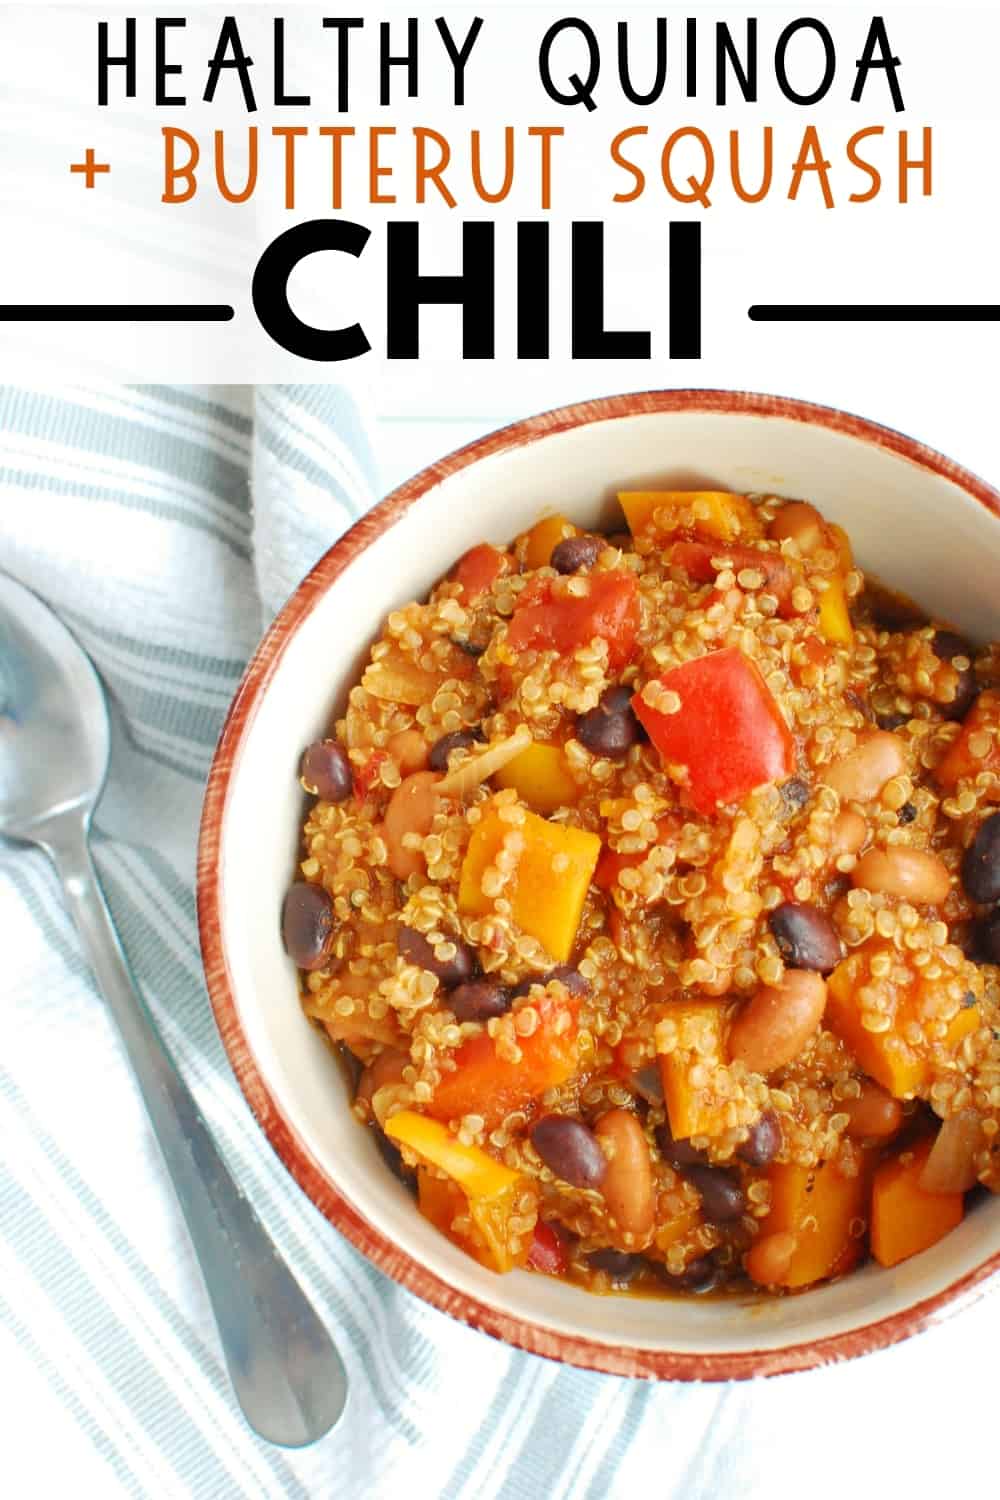 A bowl full of butternut squash quinoa chili with a spoon next to it.